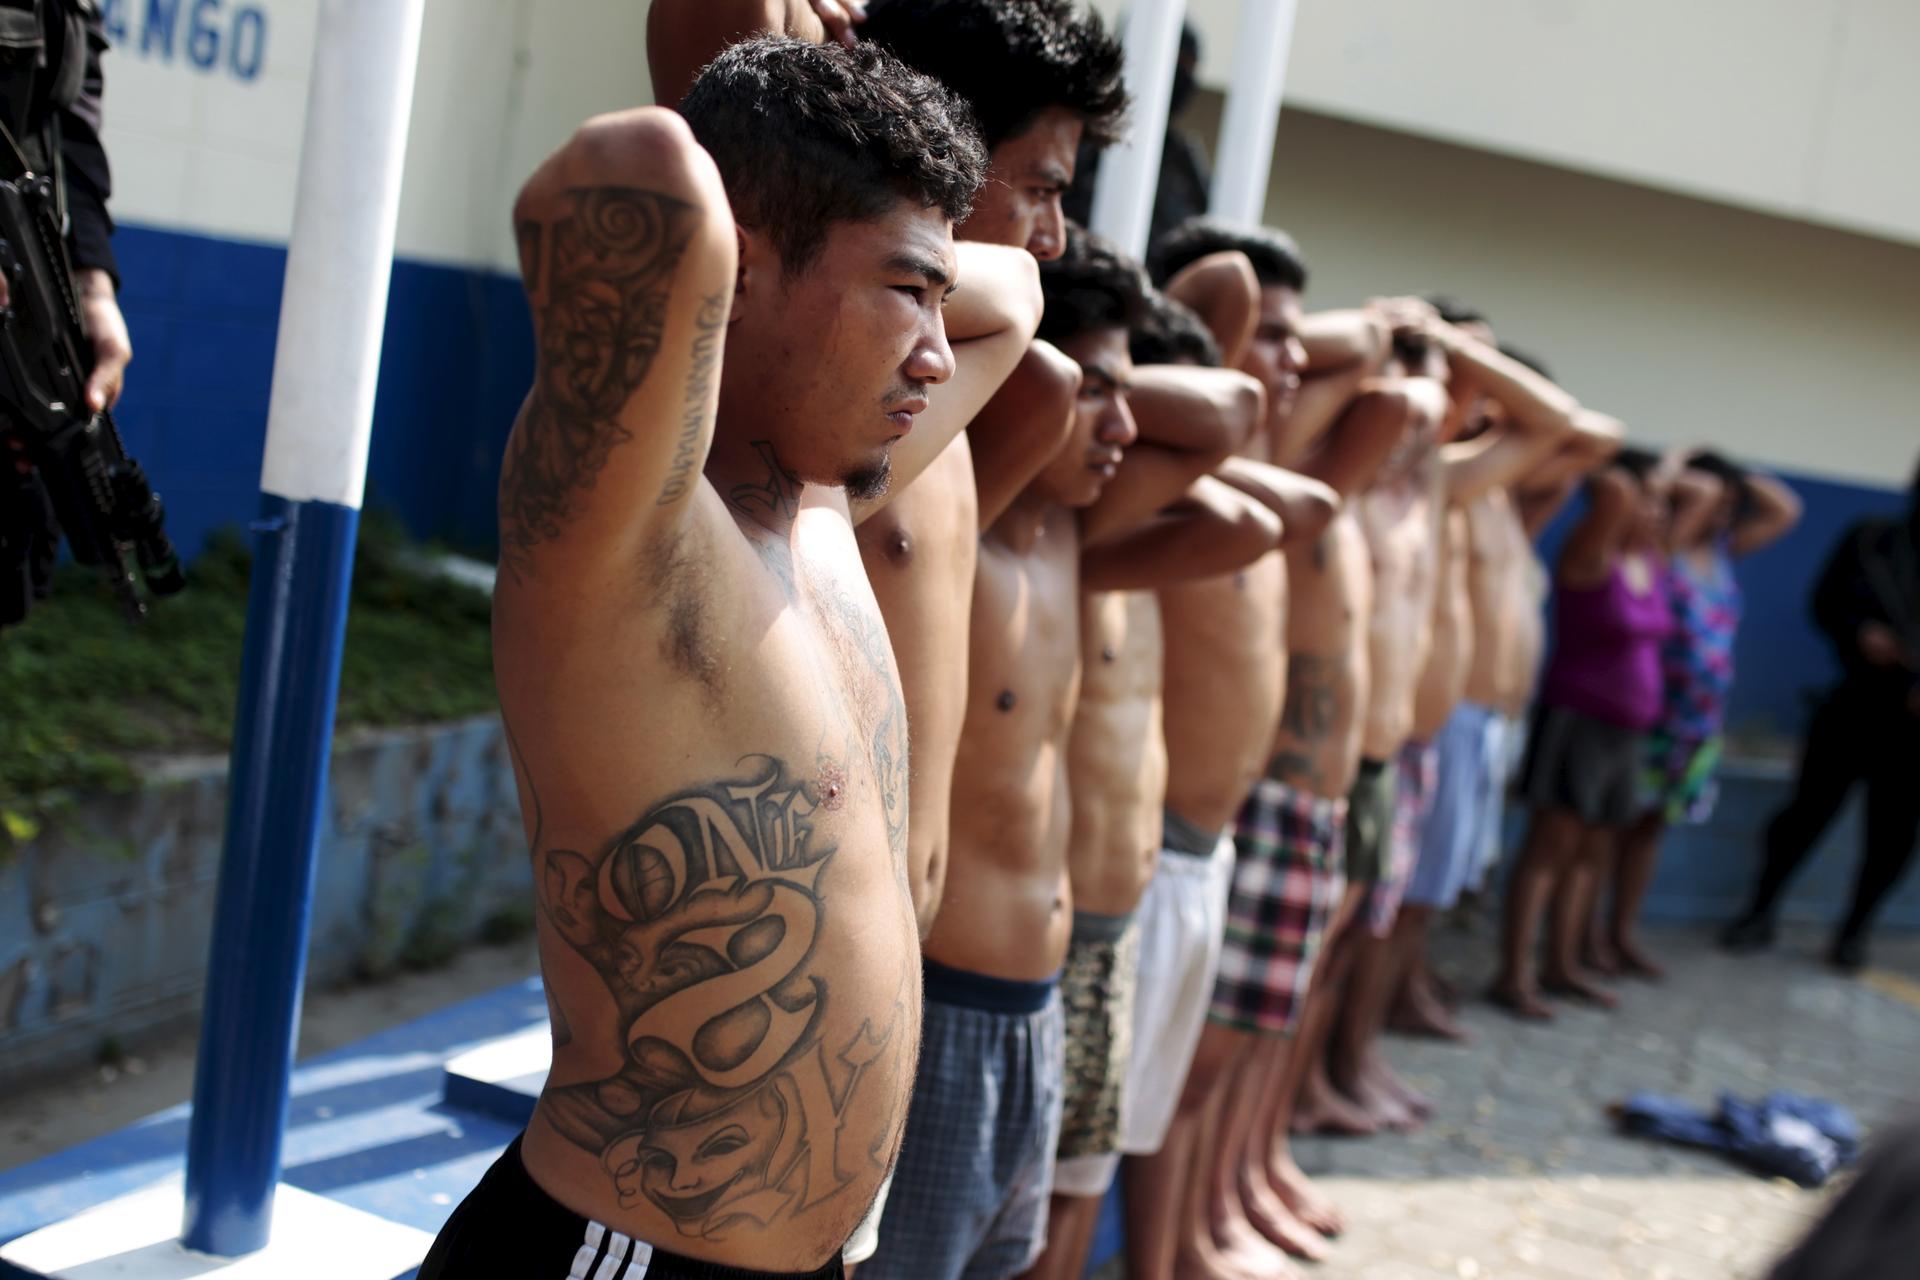 13 suspected members of the 18th street gang are presented to the media after being arrested by the police in Soyapango, El Salvador in March.